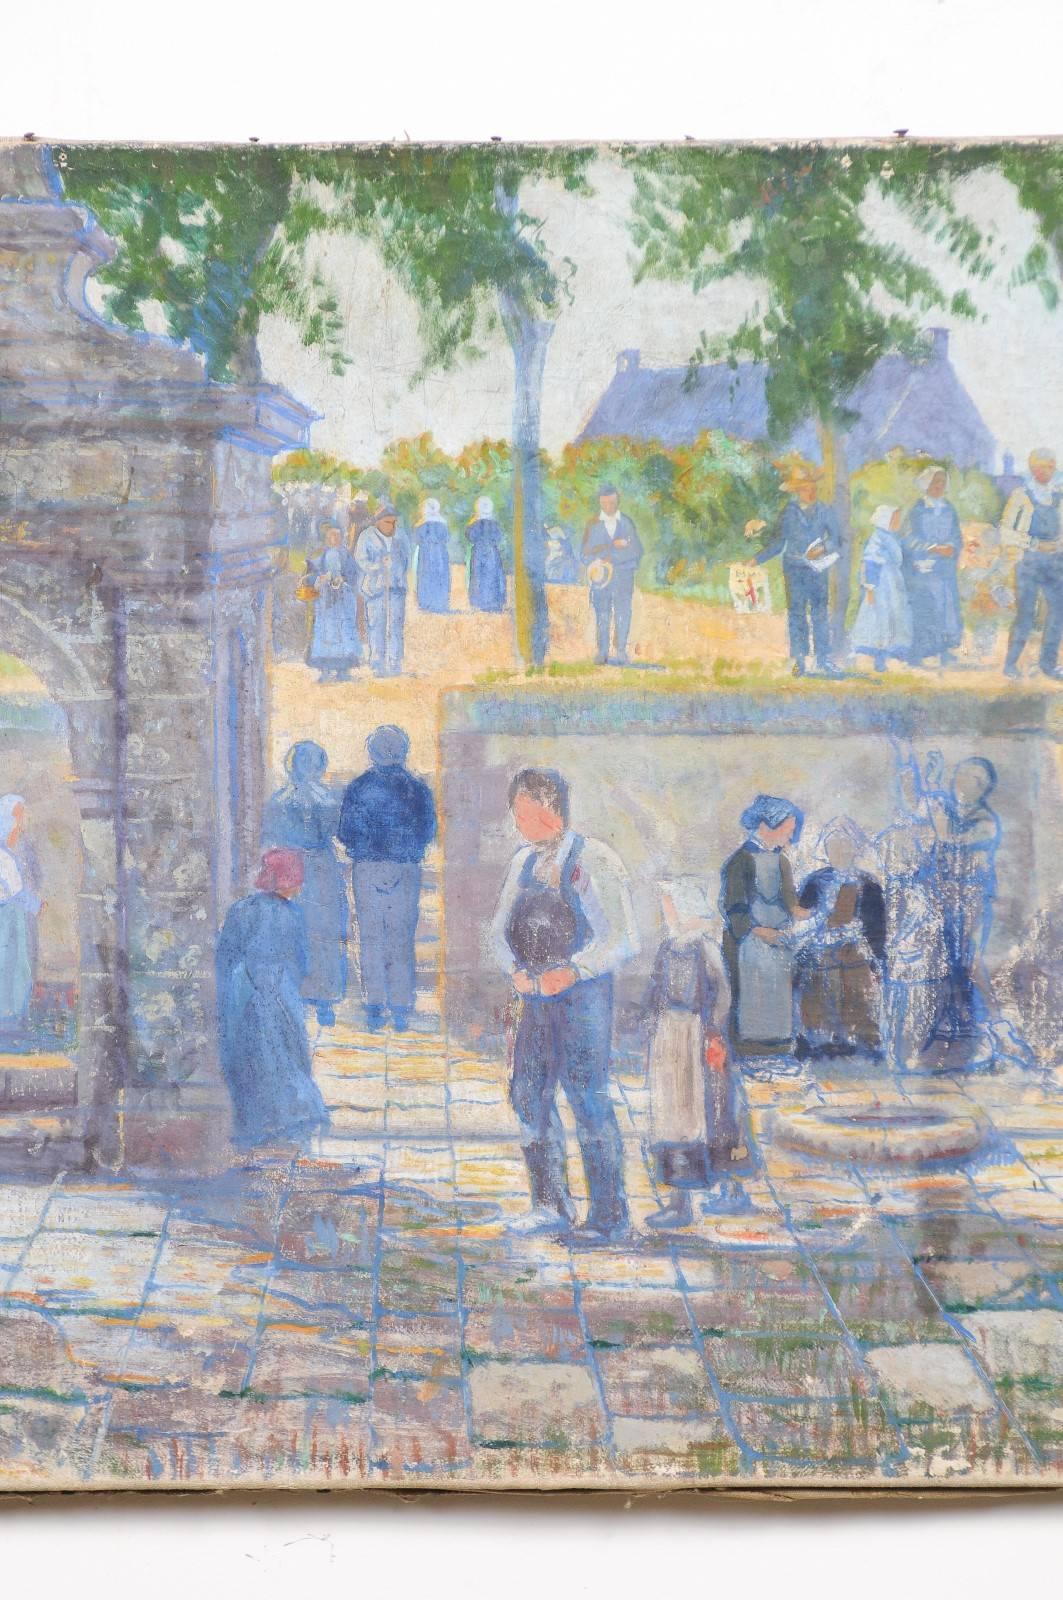 19th Century French 1890s Oil Provençal Painting of a Social Gathering in Shades of Blue